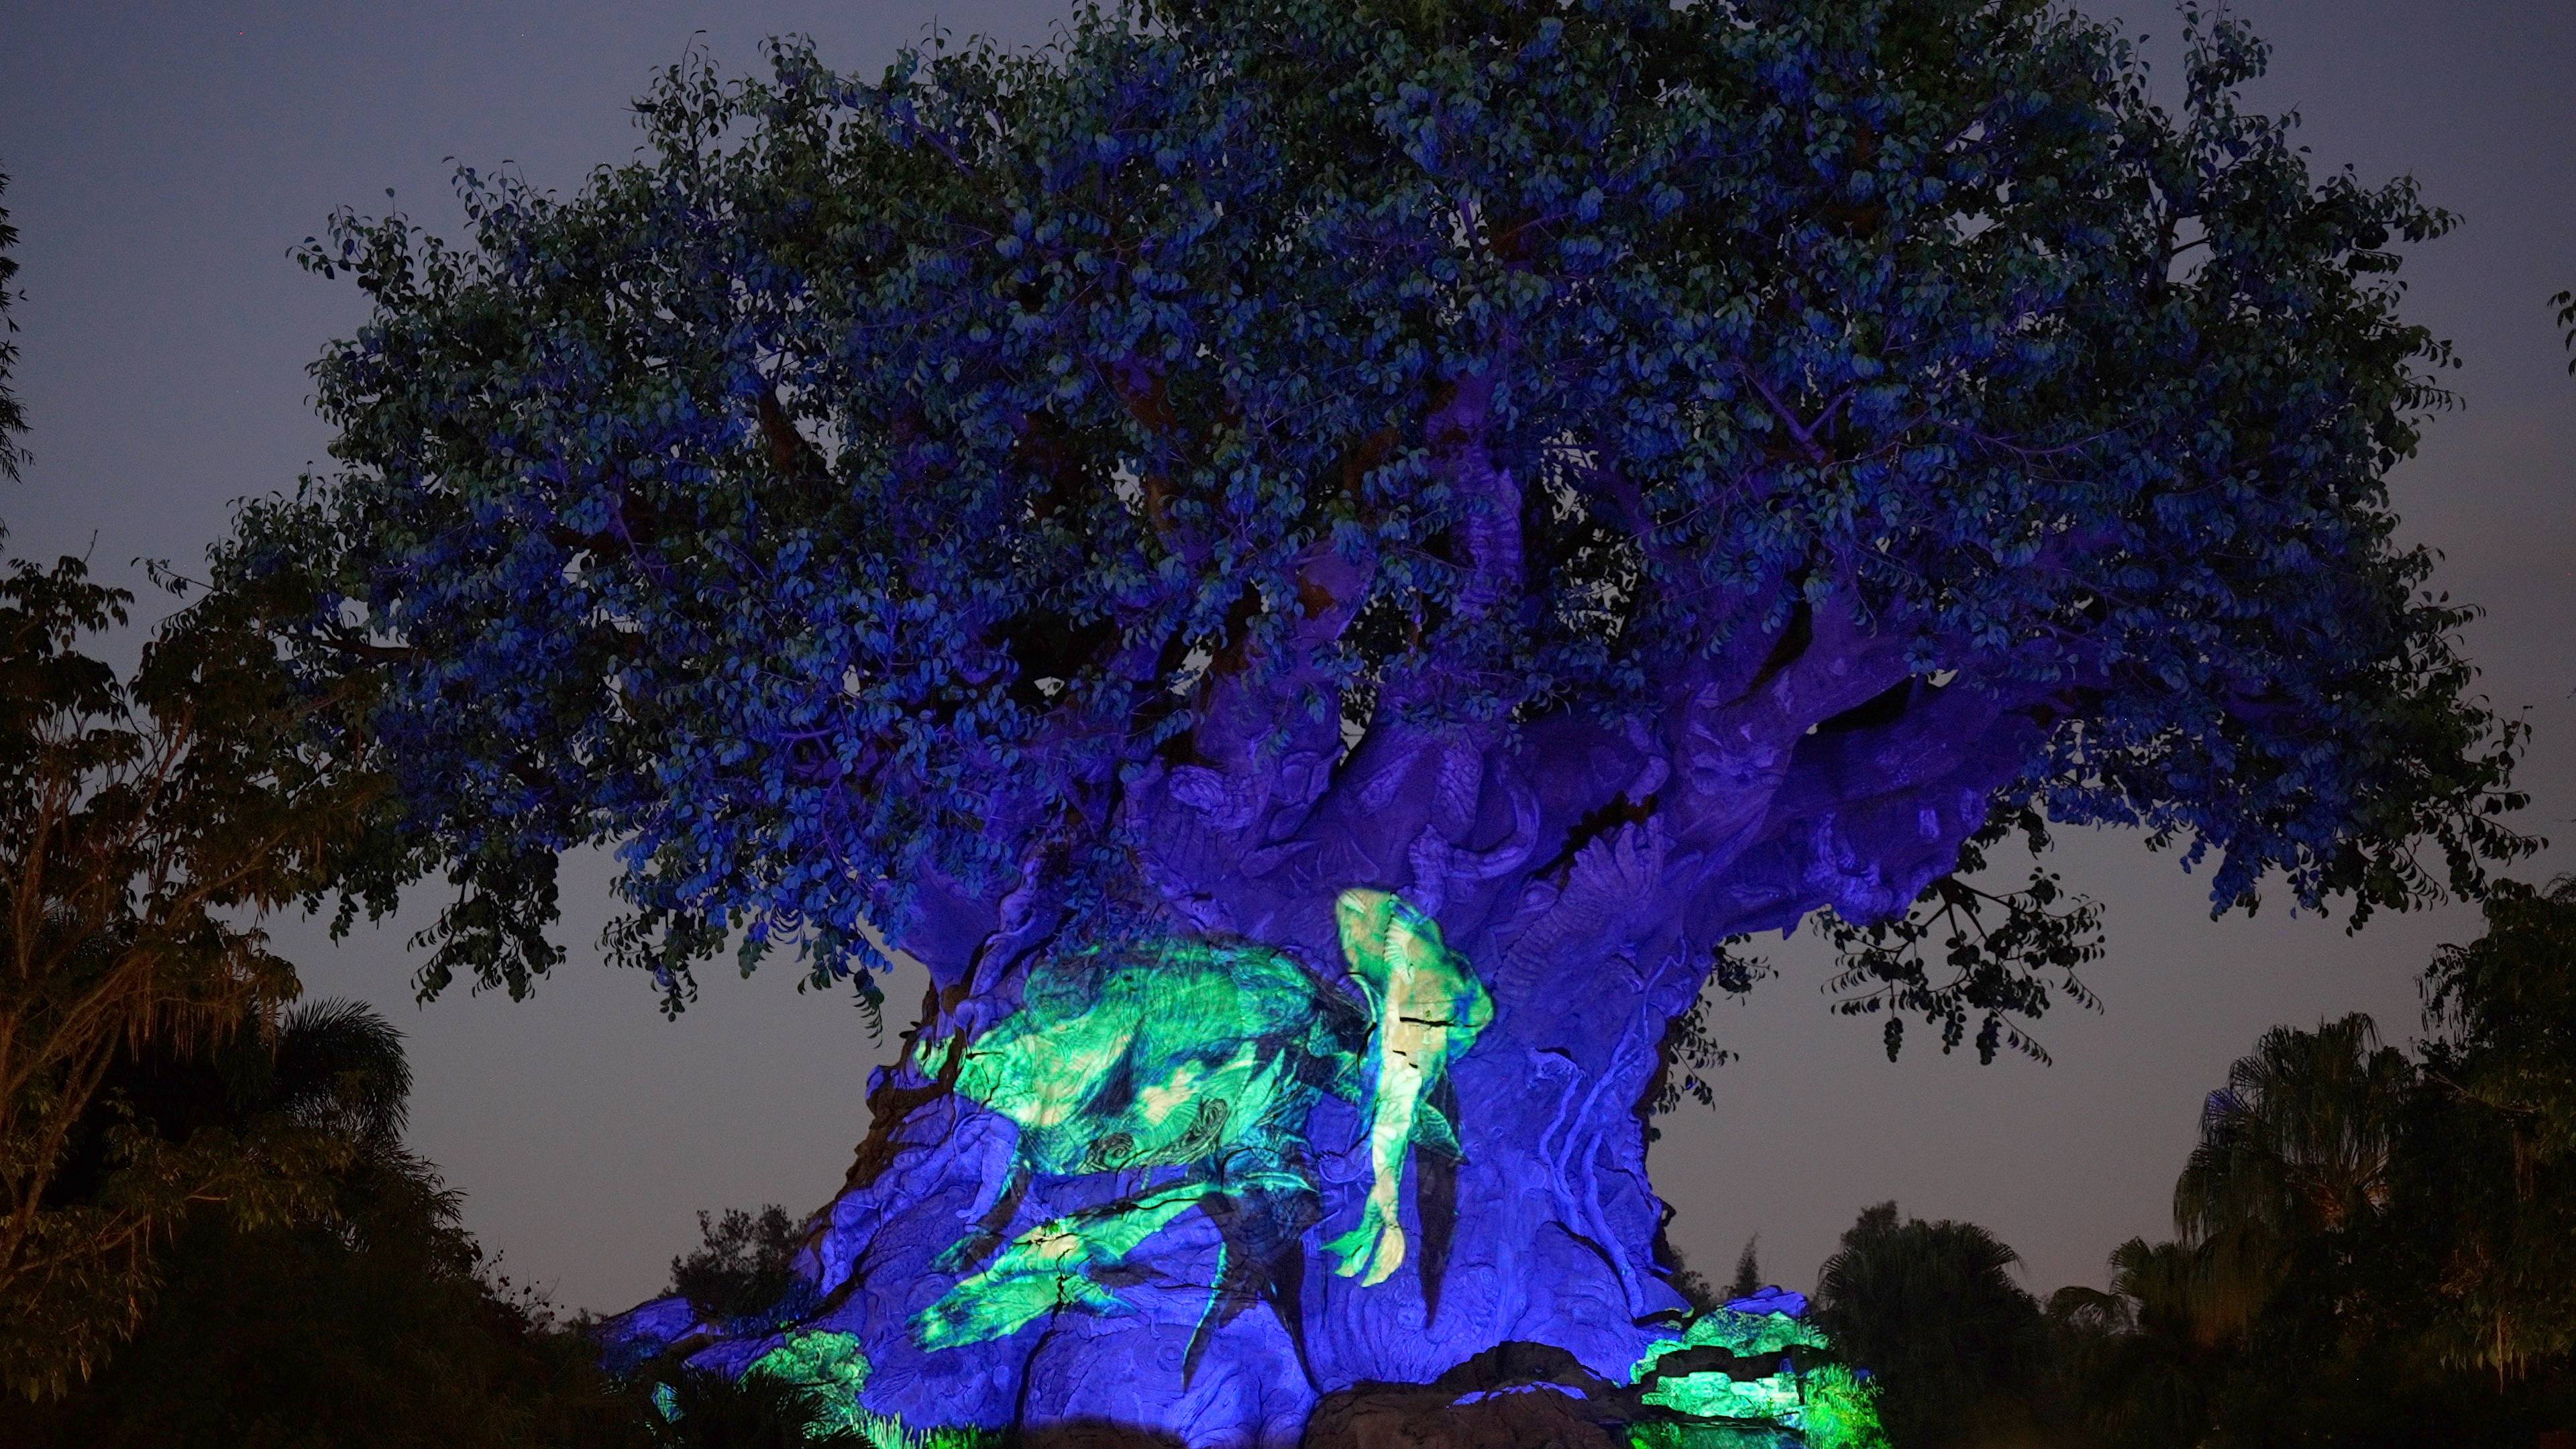 Avatar: The Way of Water' projection show is now playing on the Tree of  Life at Disney's Animal Kingdom